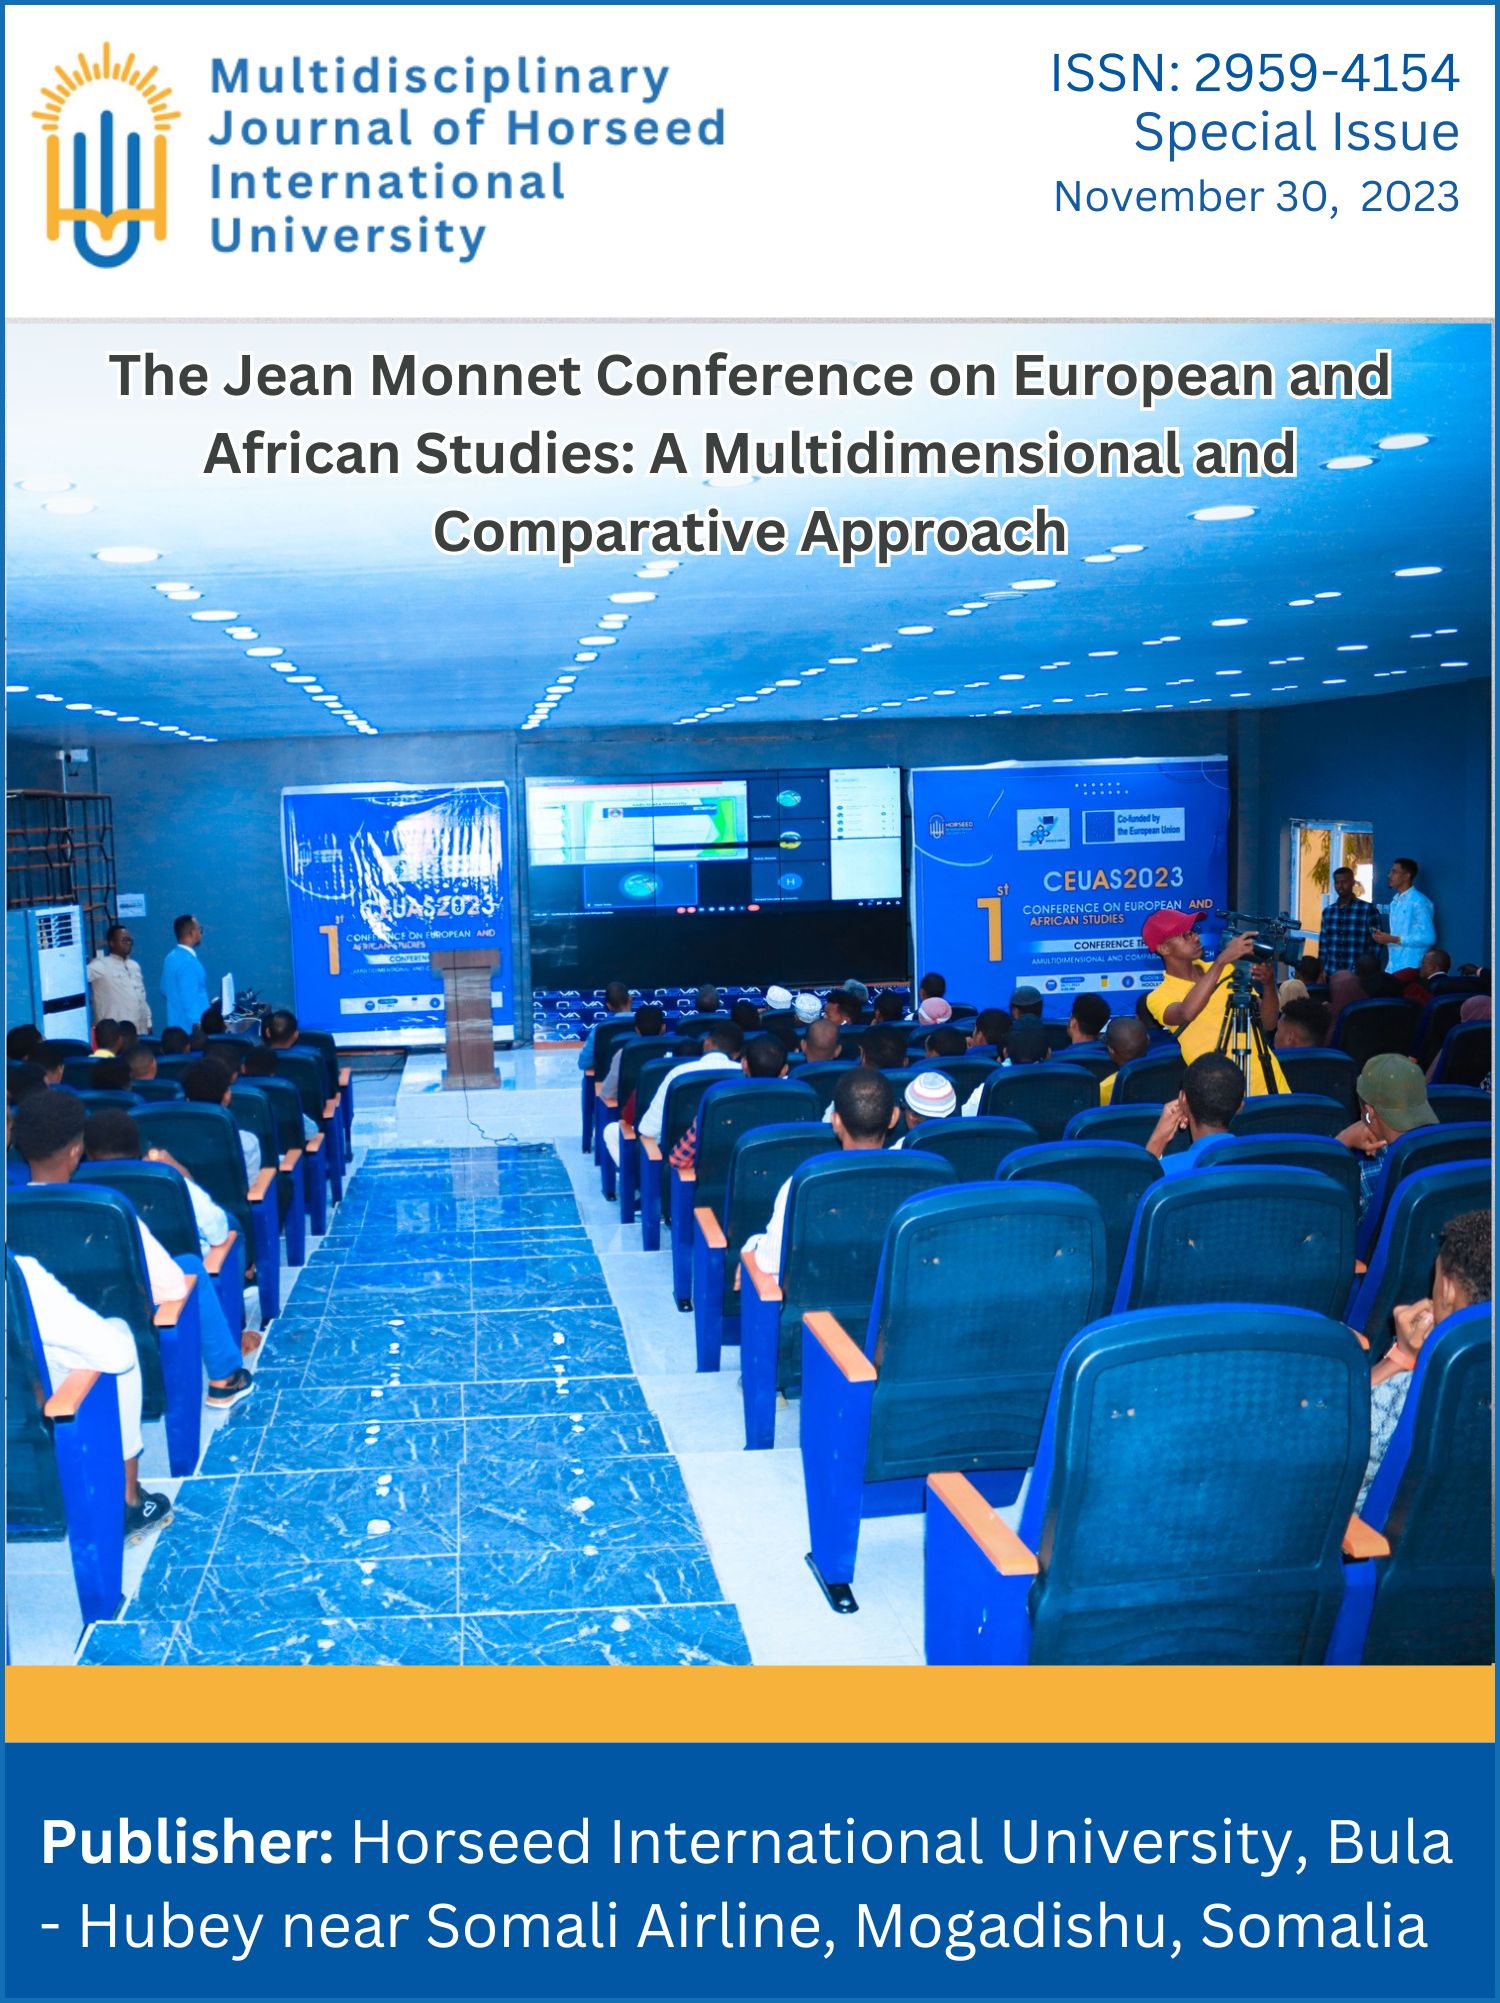 					View Special Issue for "The Jean Monnet Conference on European and African Studies: A Multidimensional and Comparative Approach".
				